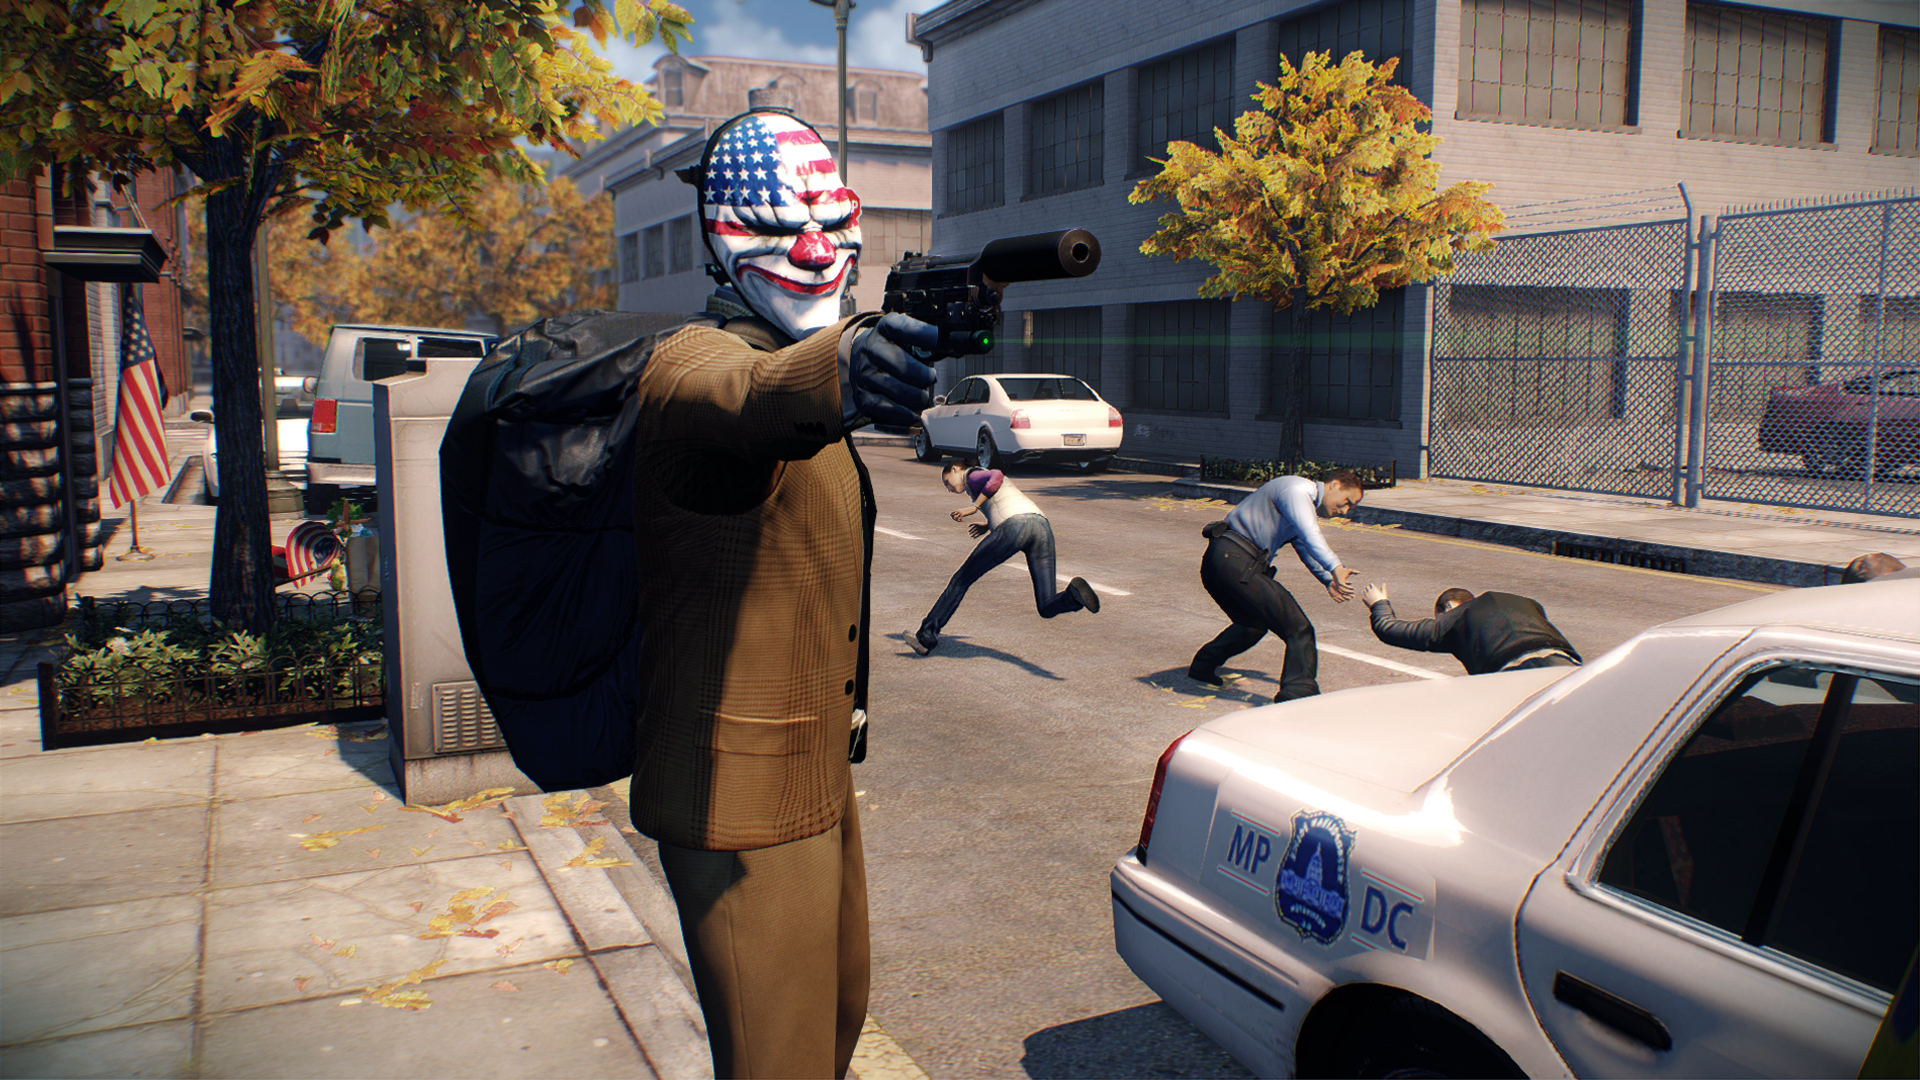 Completely overkill pack для payday 2 фото 60